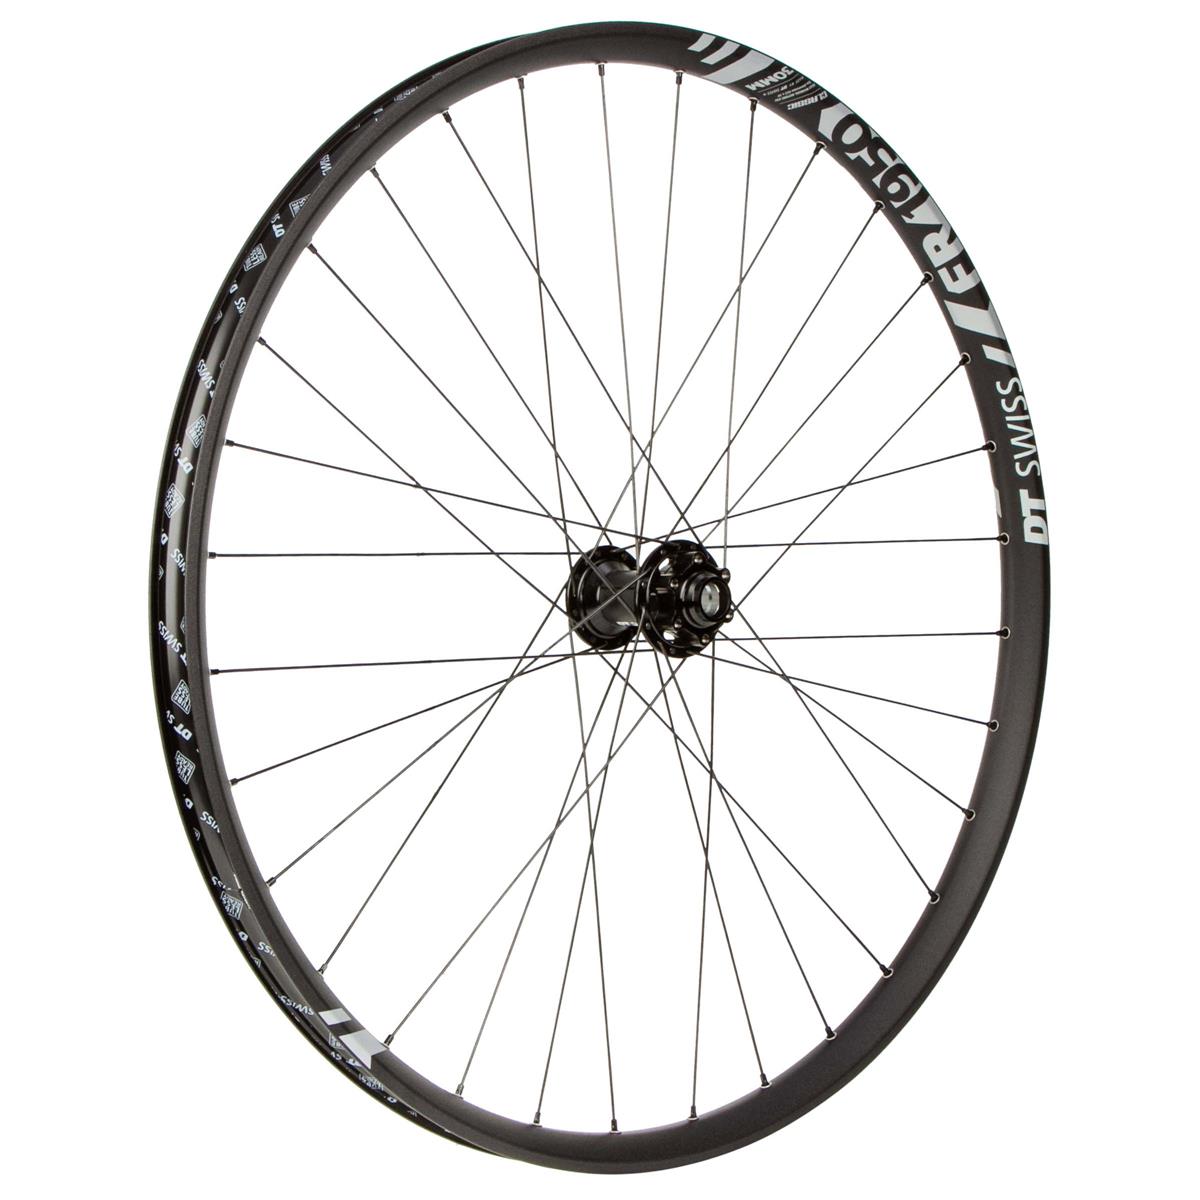 DT Swiss Wheel FR 1950 Classic Front, 29 Inches, 20x110 mm TA, Boost, 6-Bolt, 30 mm